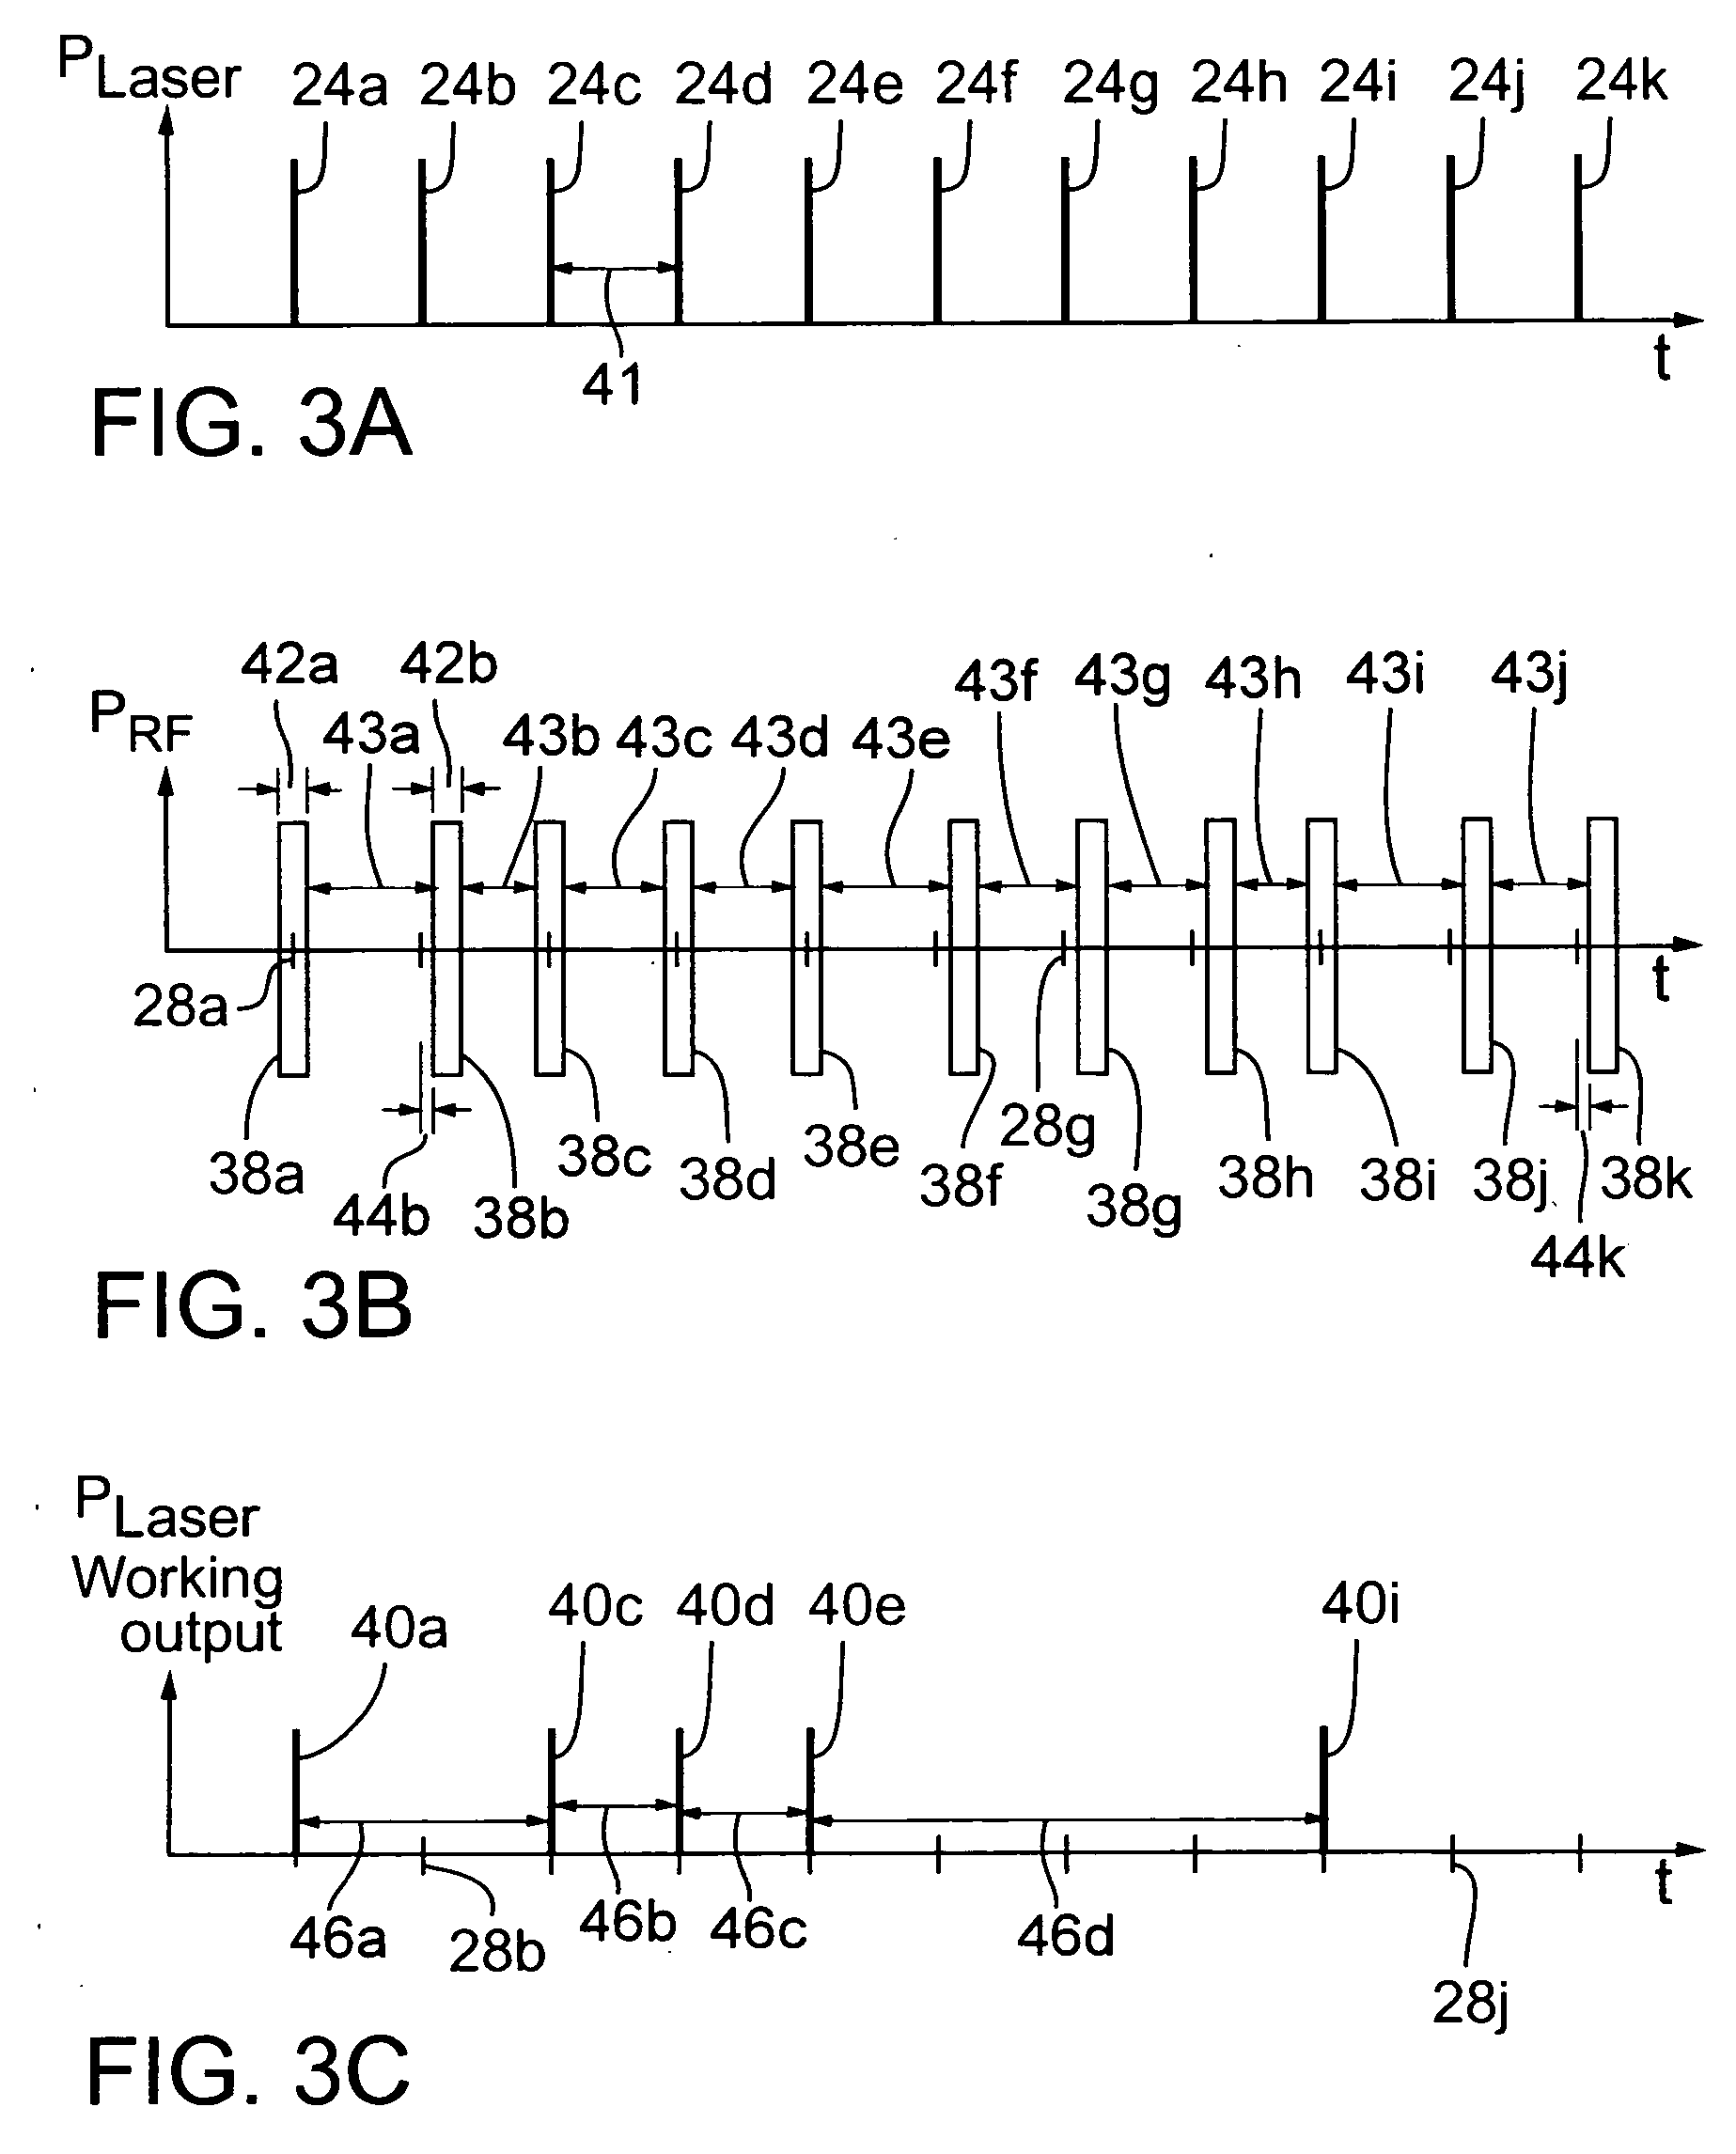 Workpiece processing system using a common imaged optical assembly to shape the spatial distributions of light energy of multiple laser beams